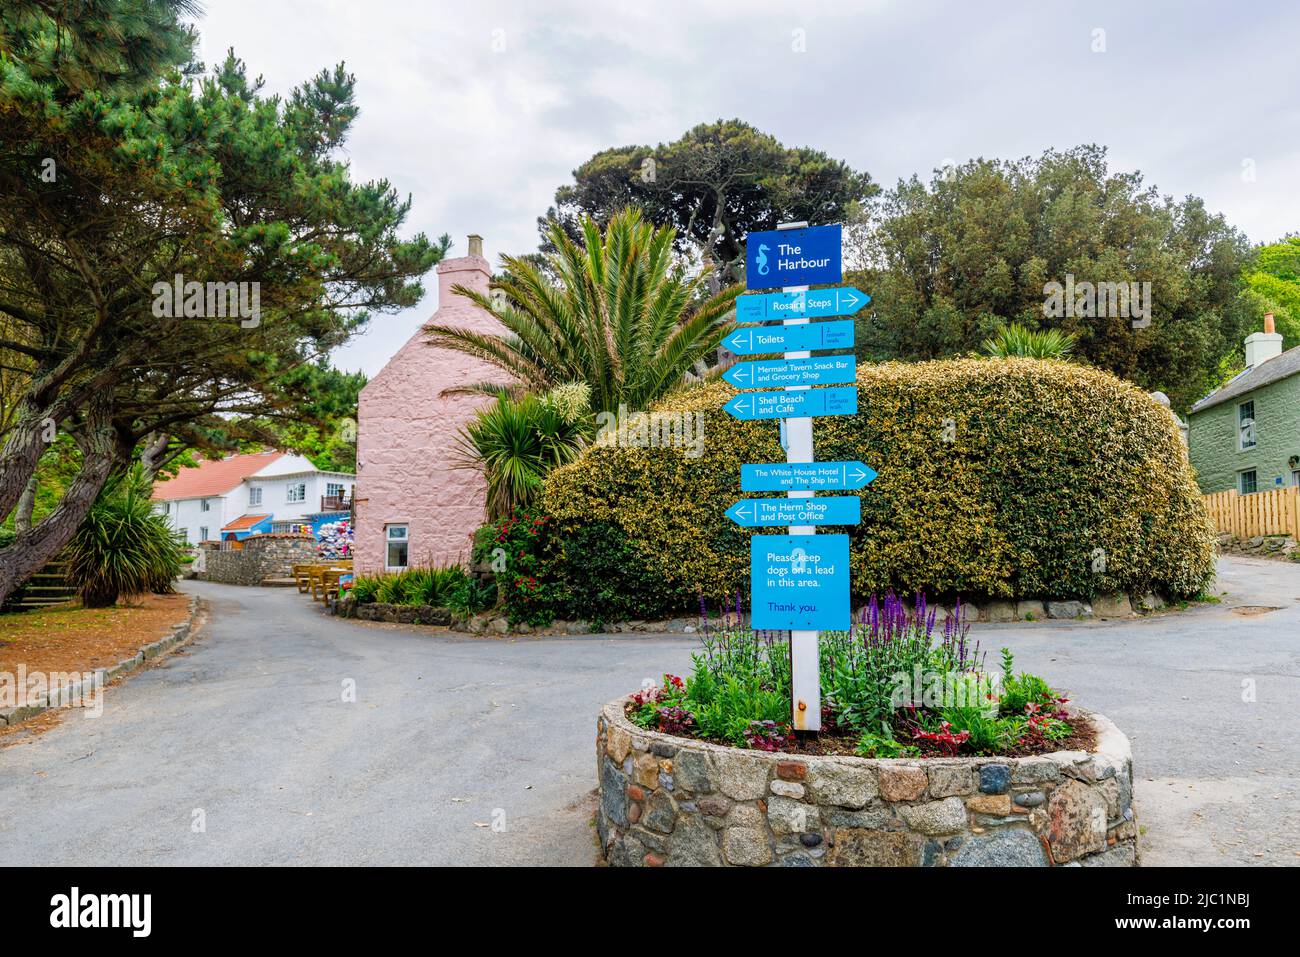 Blue finger post signpost in the Harbour with directions to the attractions of Herm, an Island in the Bailiwick of Guernsey, Channel Islands, UK Stock Photo